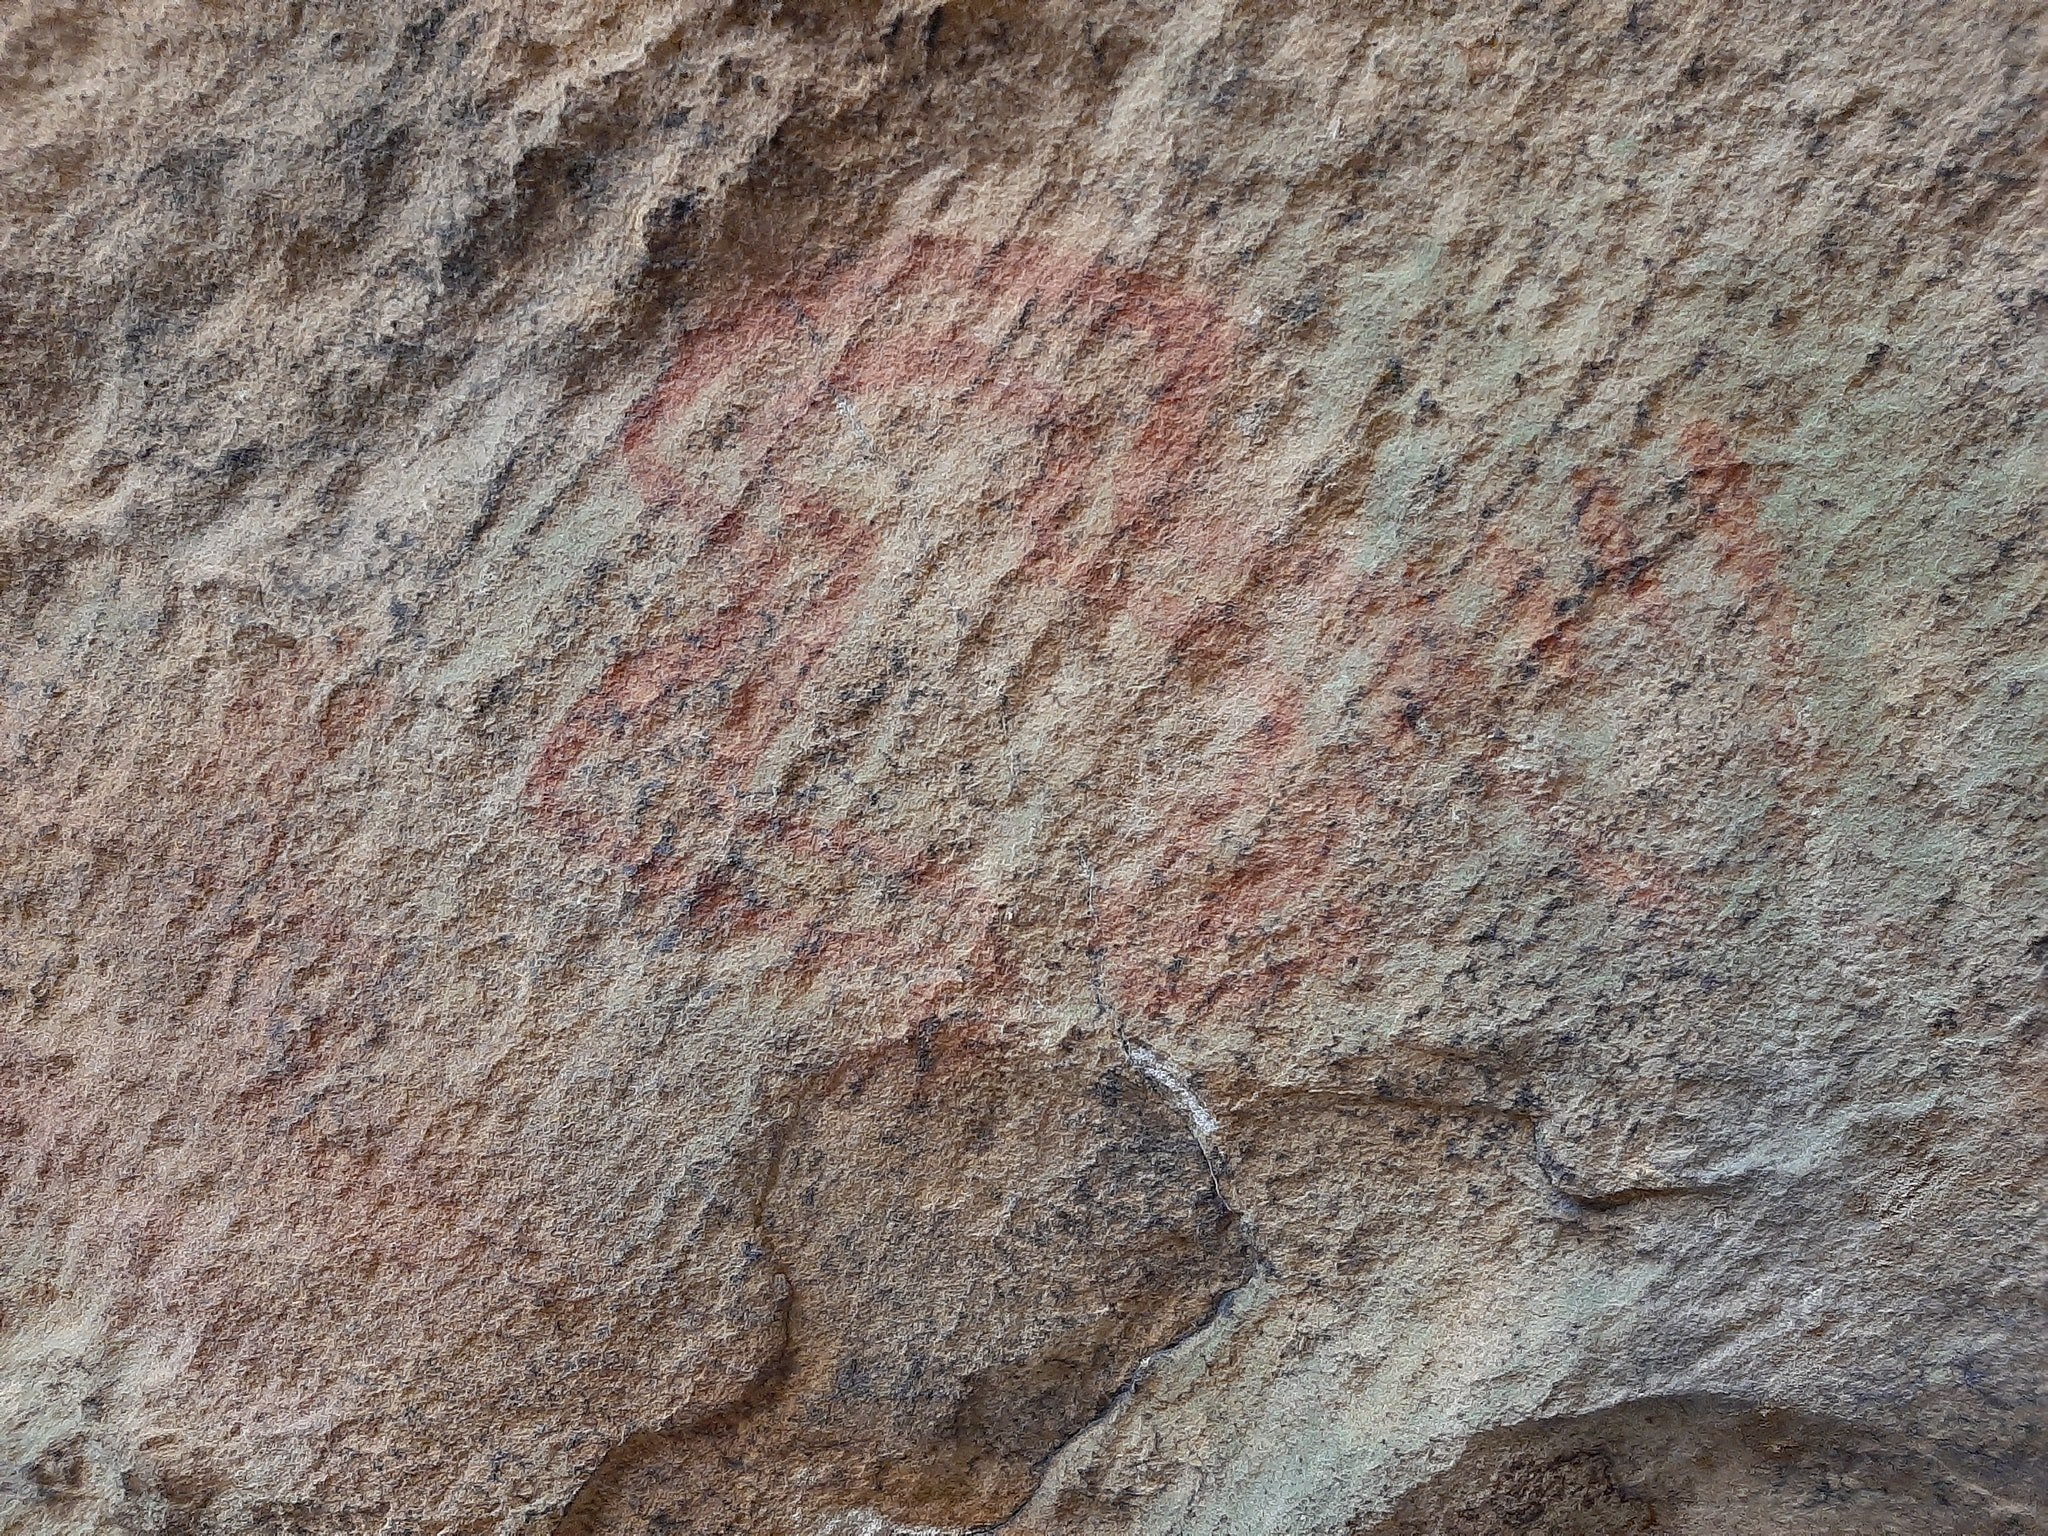 A pictograph made by pre-historic Native Americans at Rock House Cave at Petit Jean State Park in Arkansas.